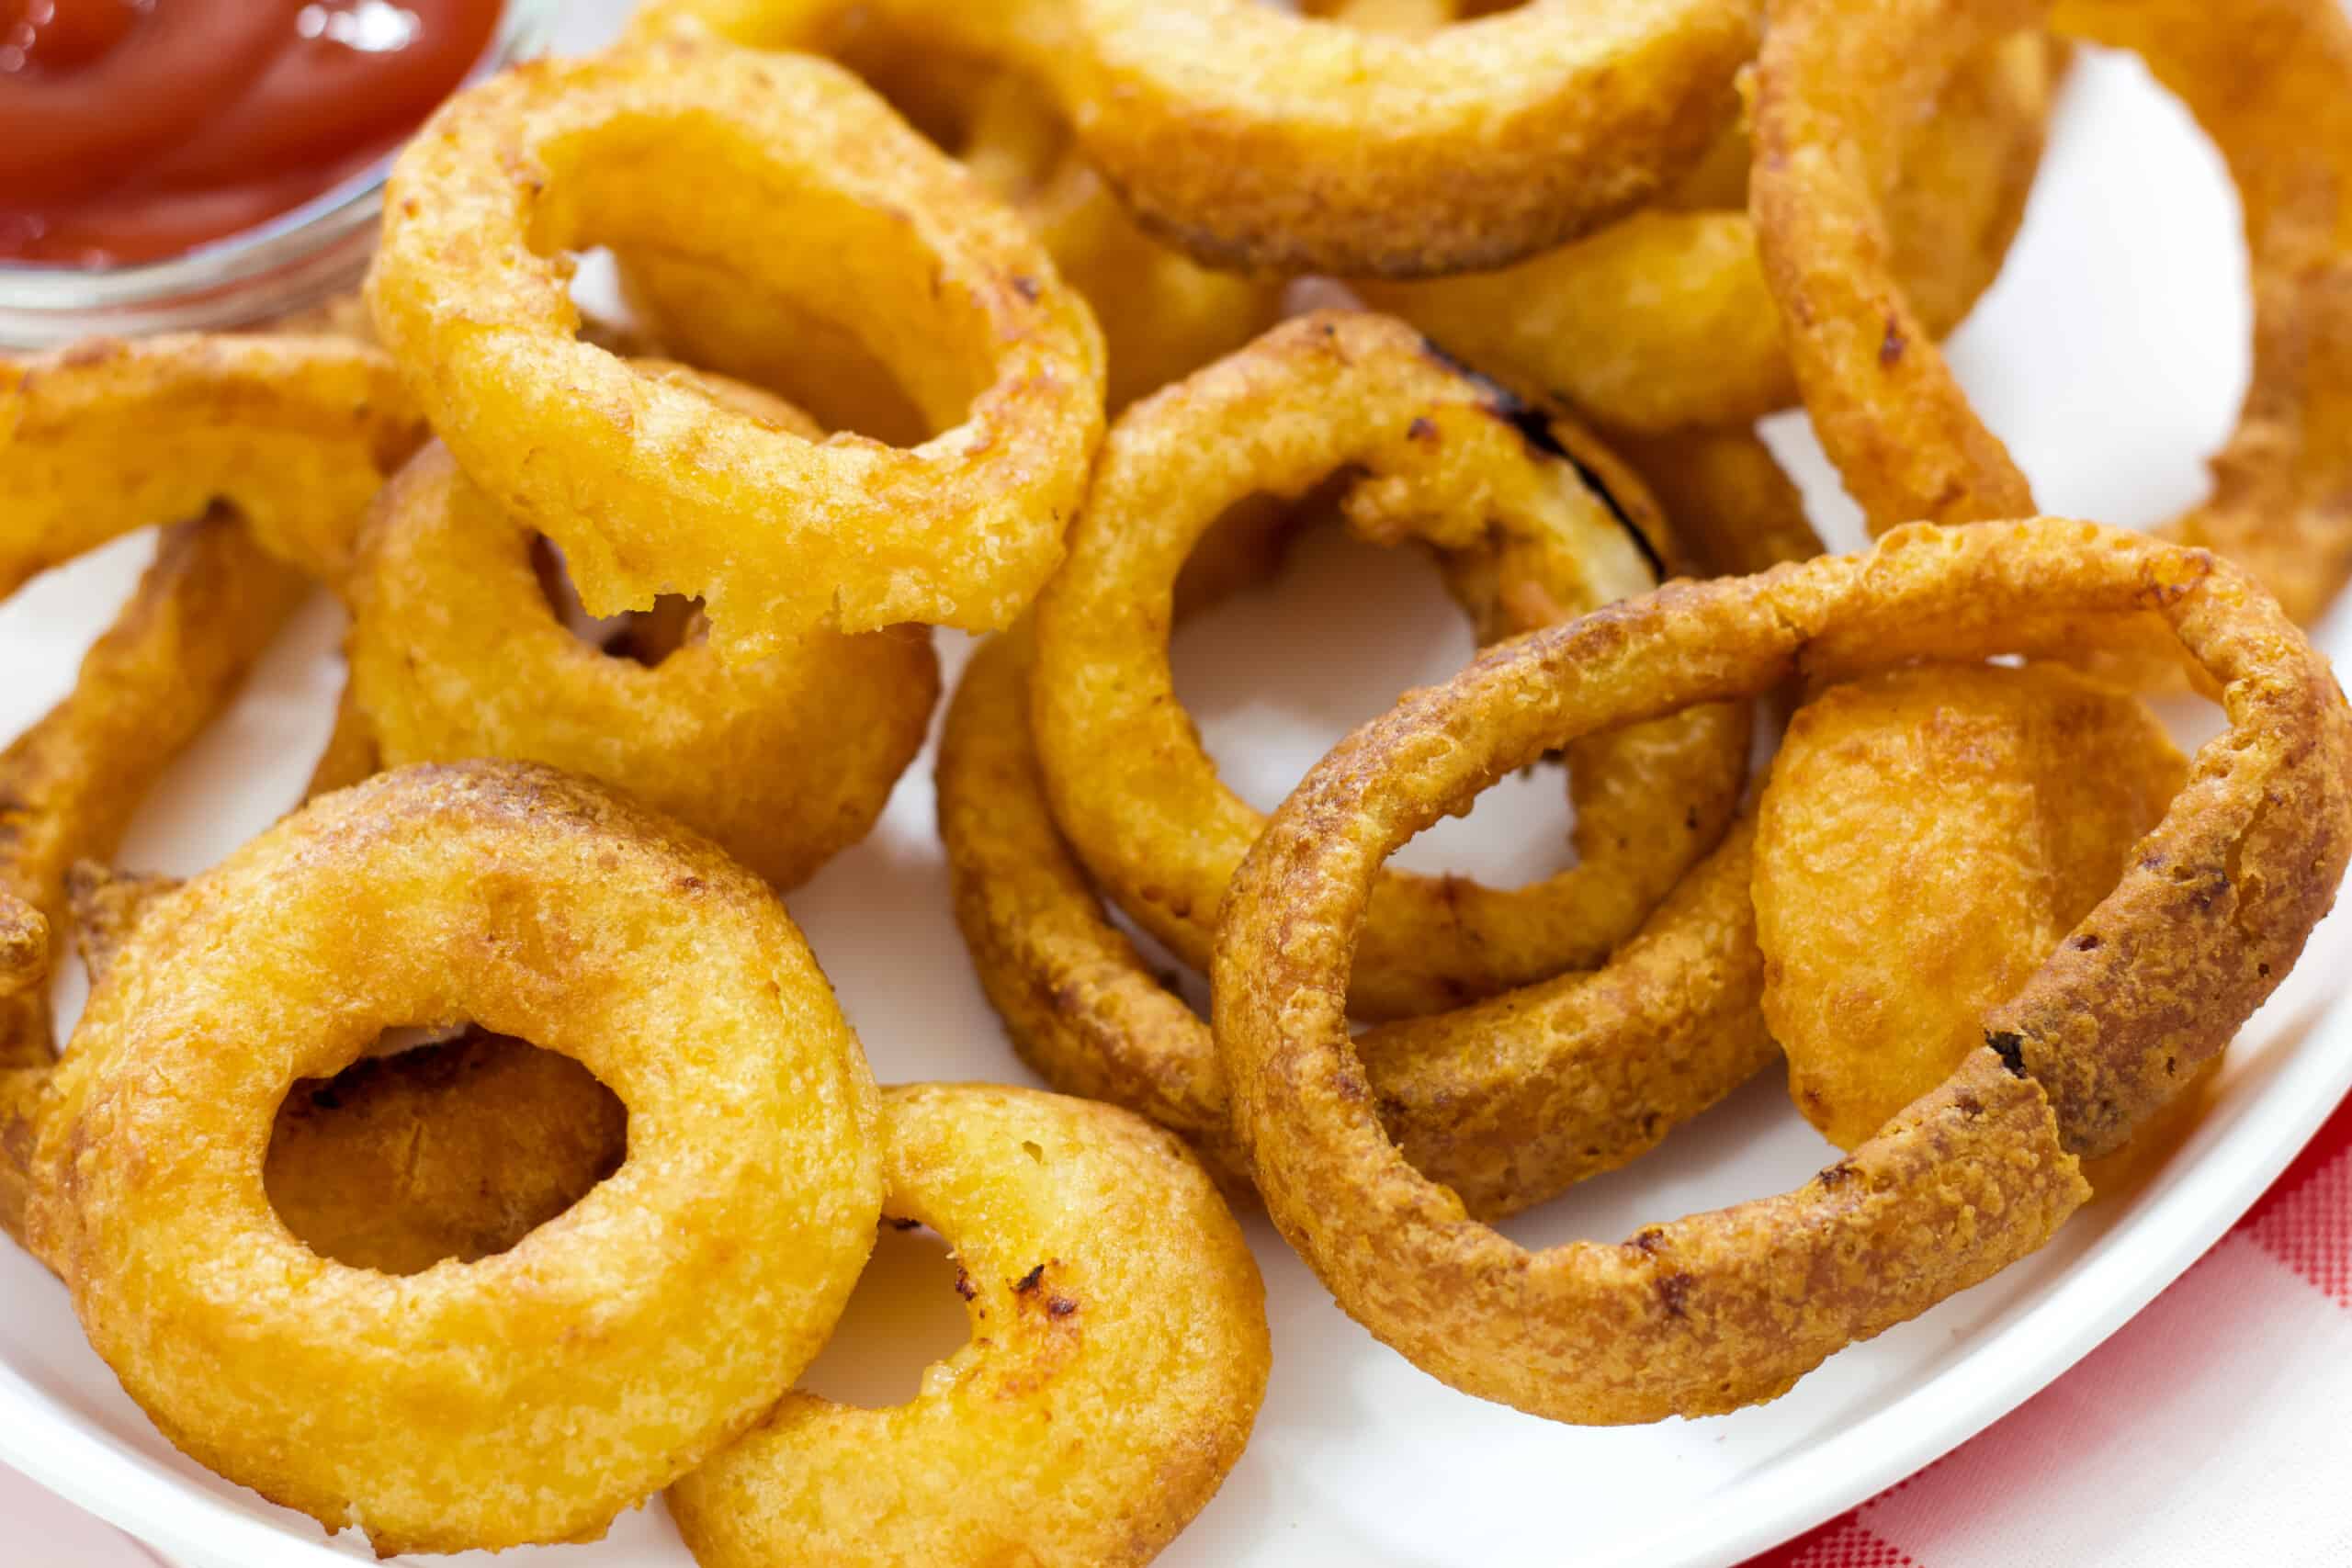 Calories in 6.59 value of Burger King - Onion Rings.